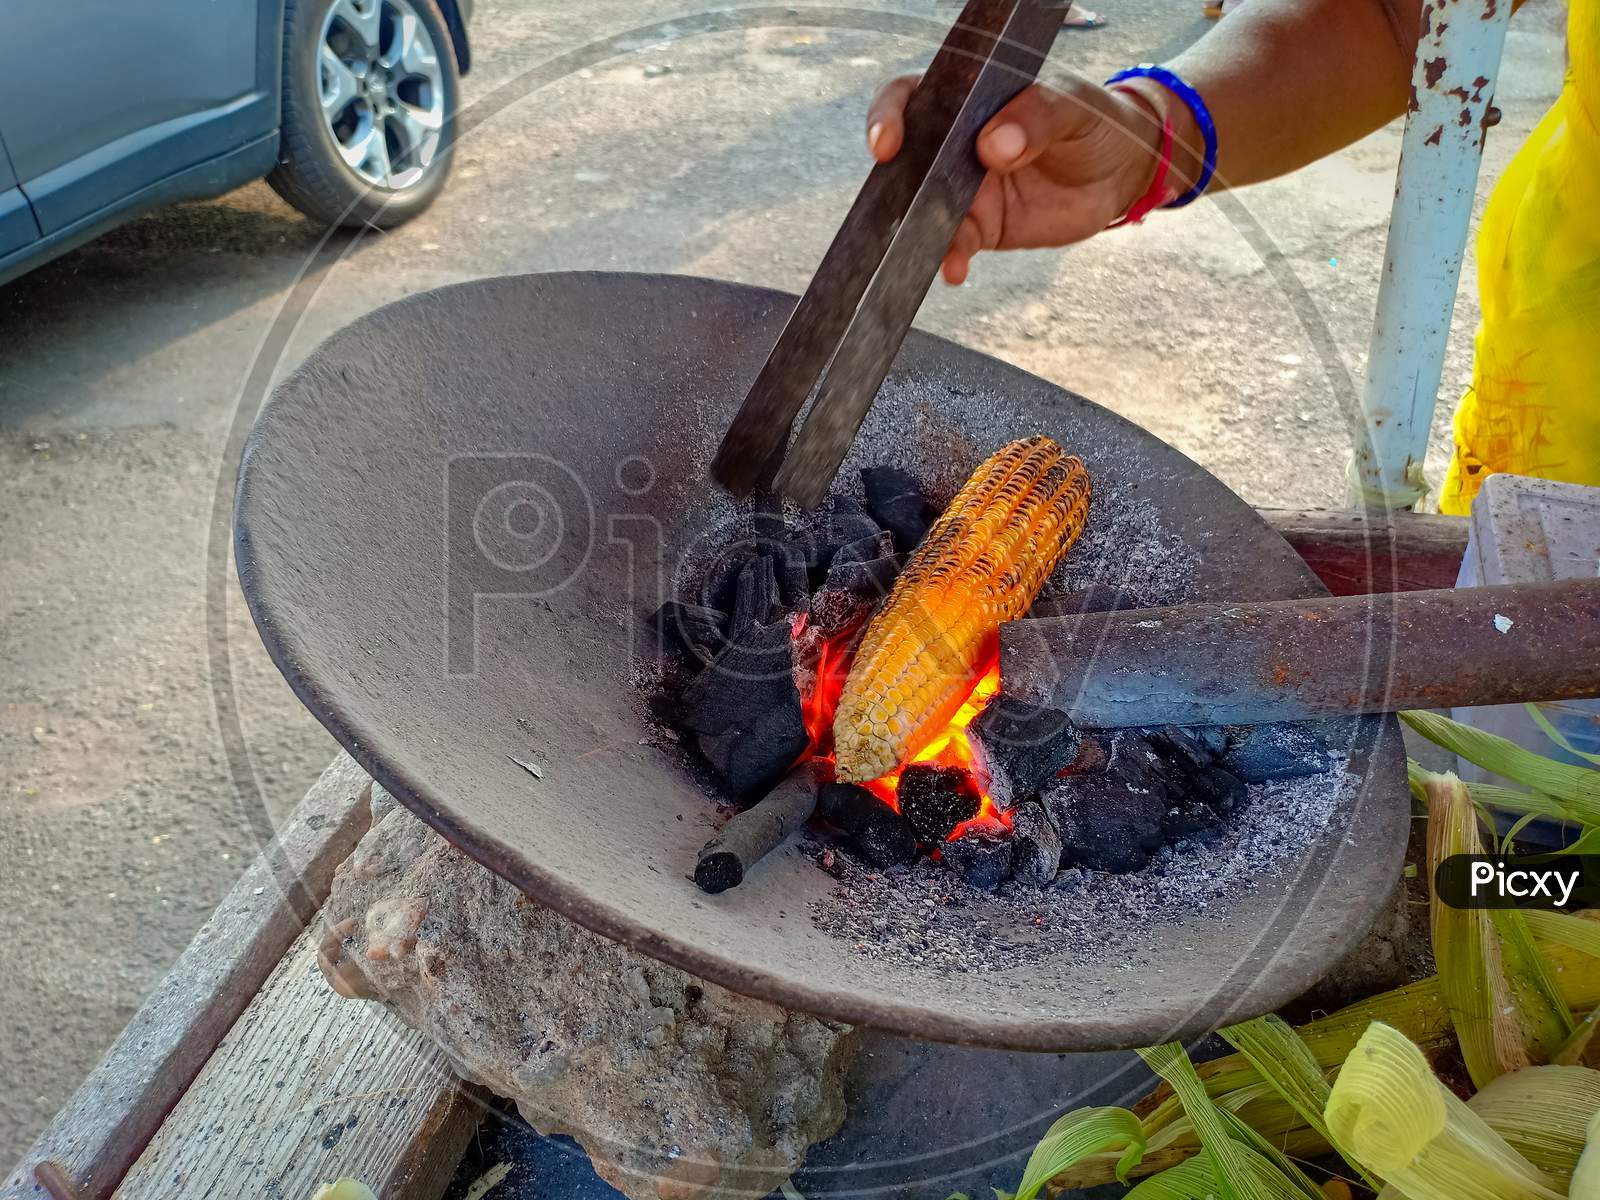 Sweet corn roasted in Charcoal fire